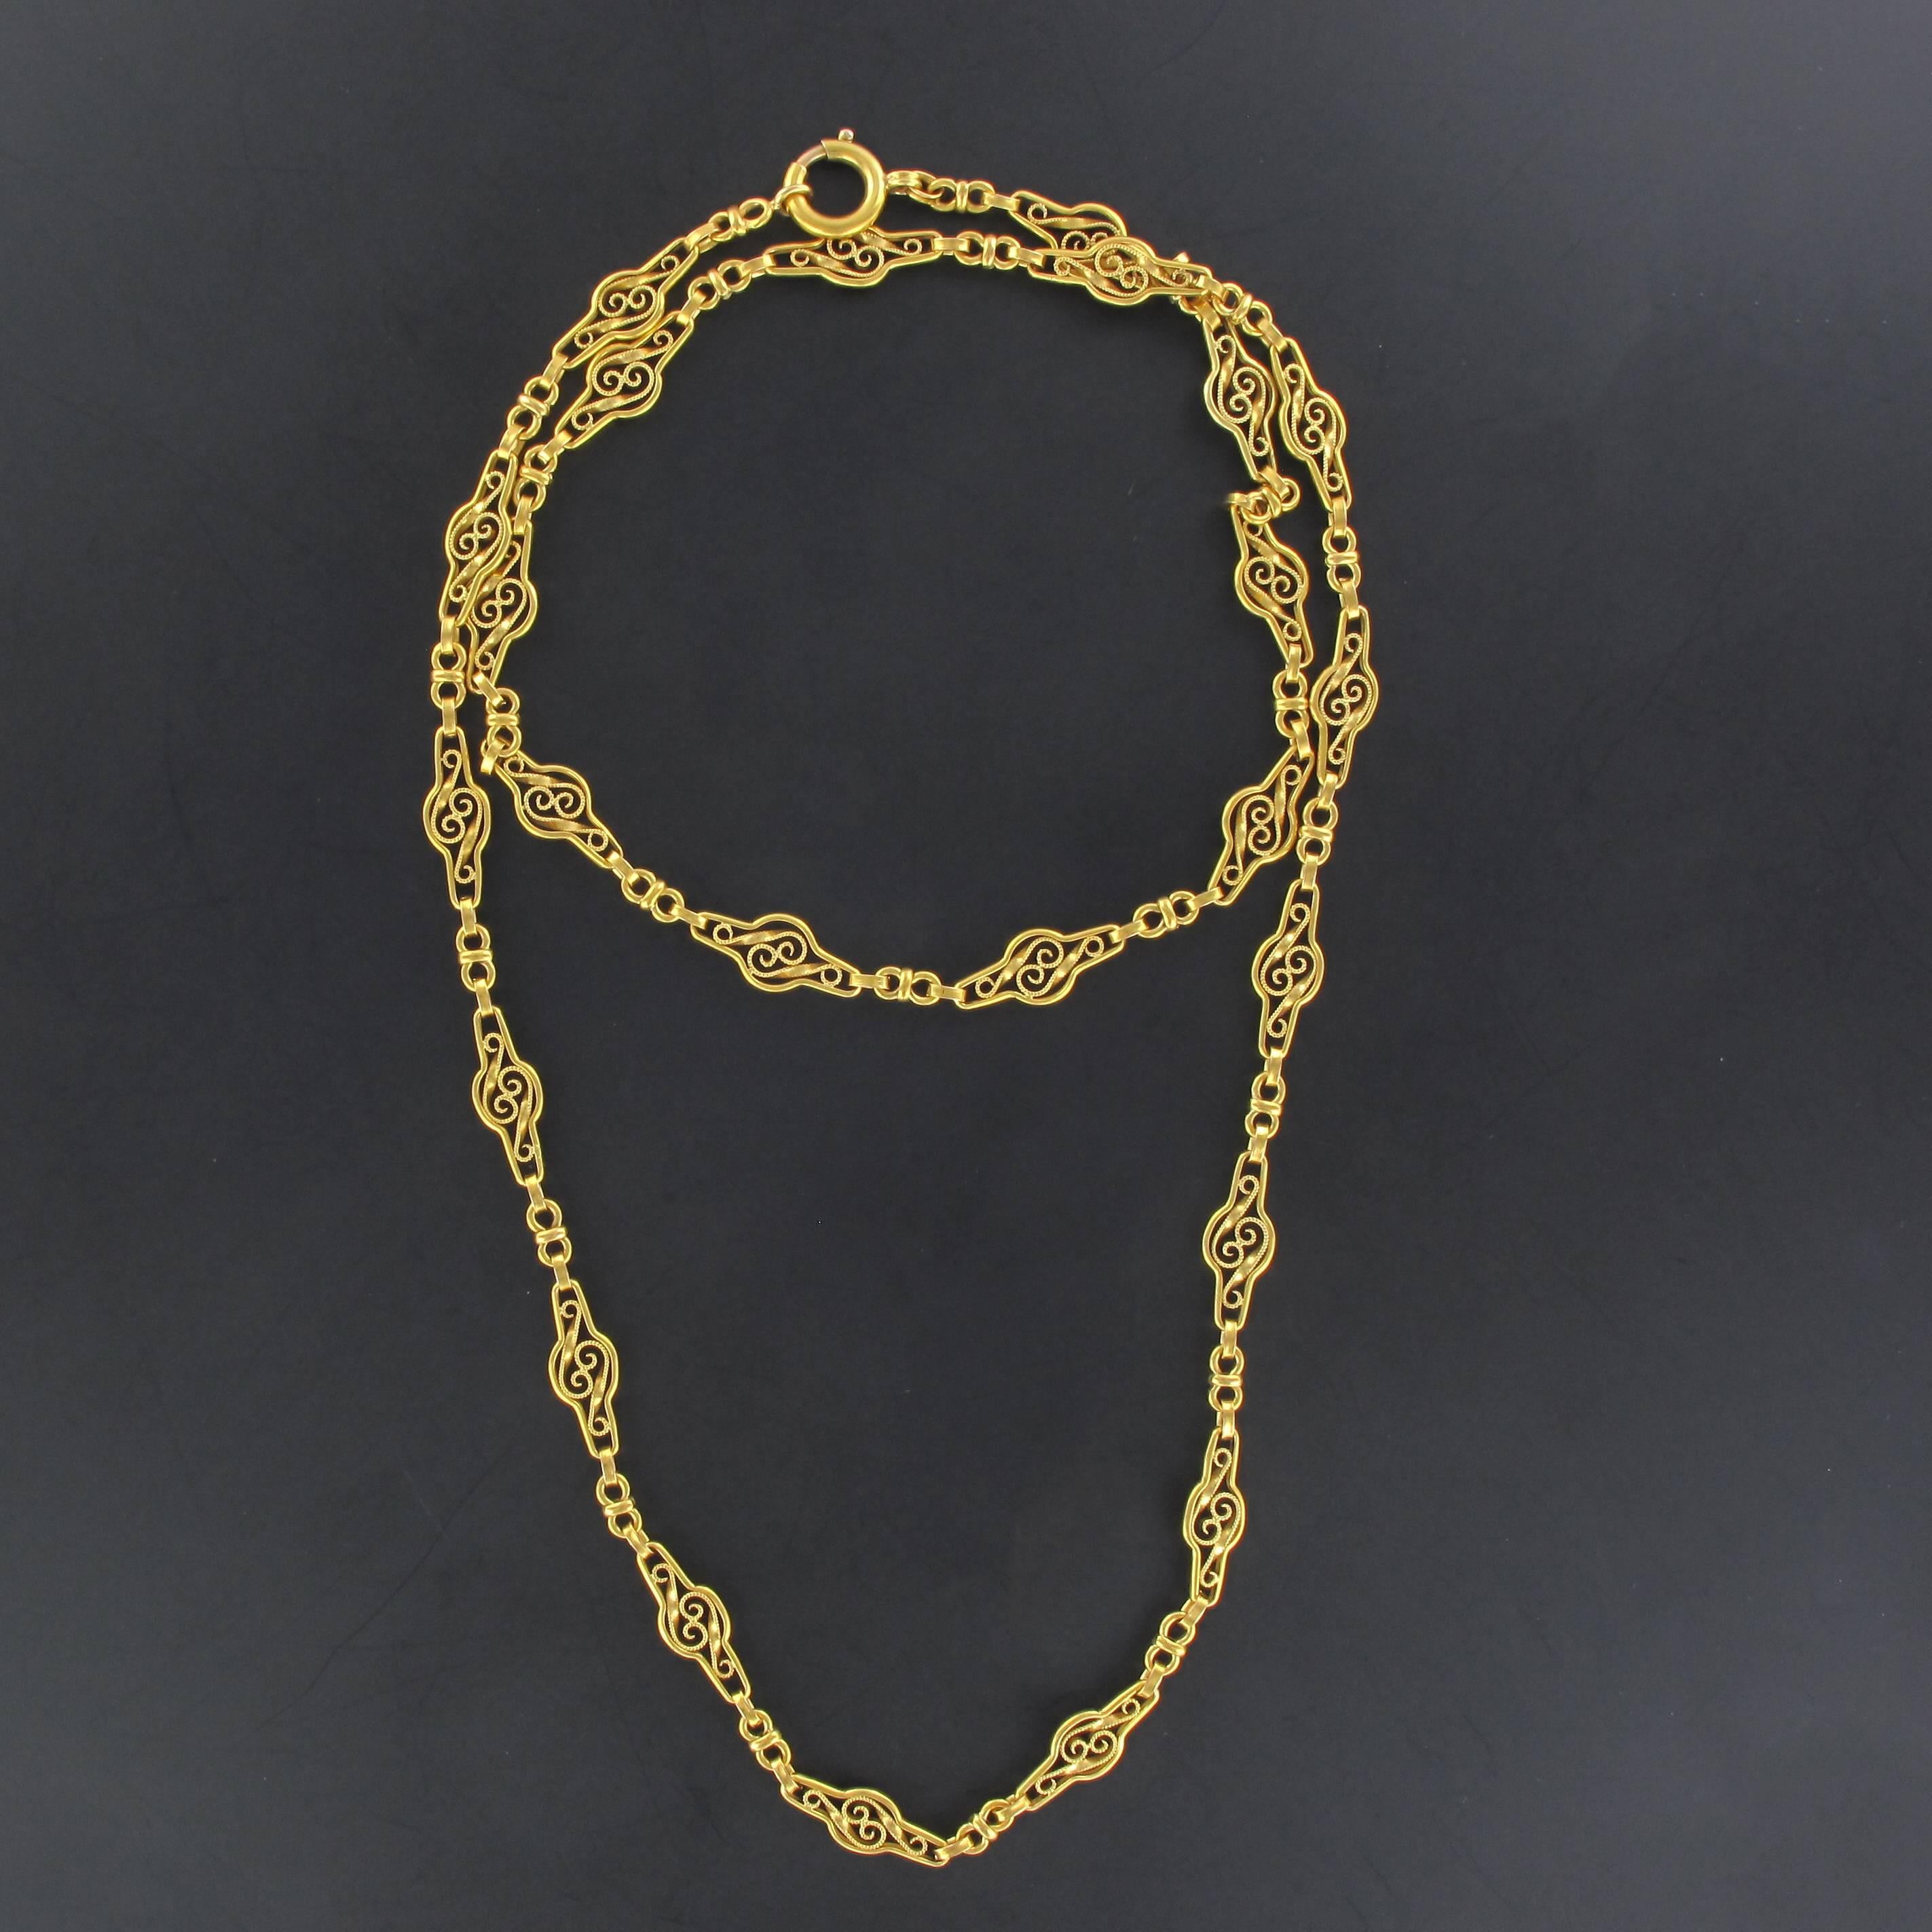 Belle Époque 1900s French Gold Matinee Necklace with Filigree Motifs